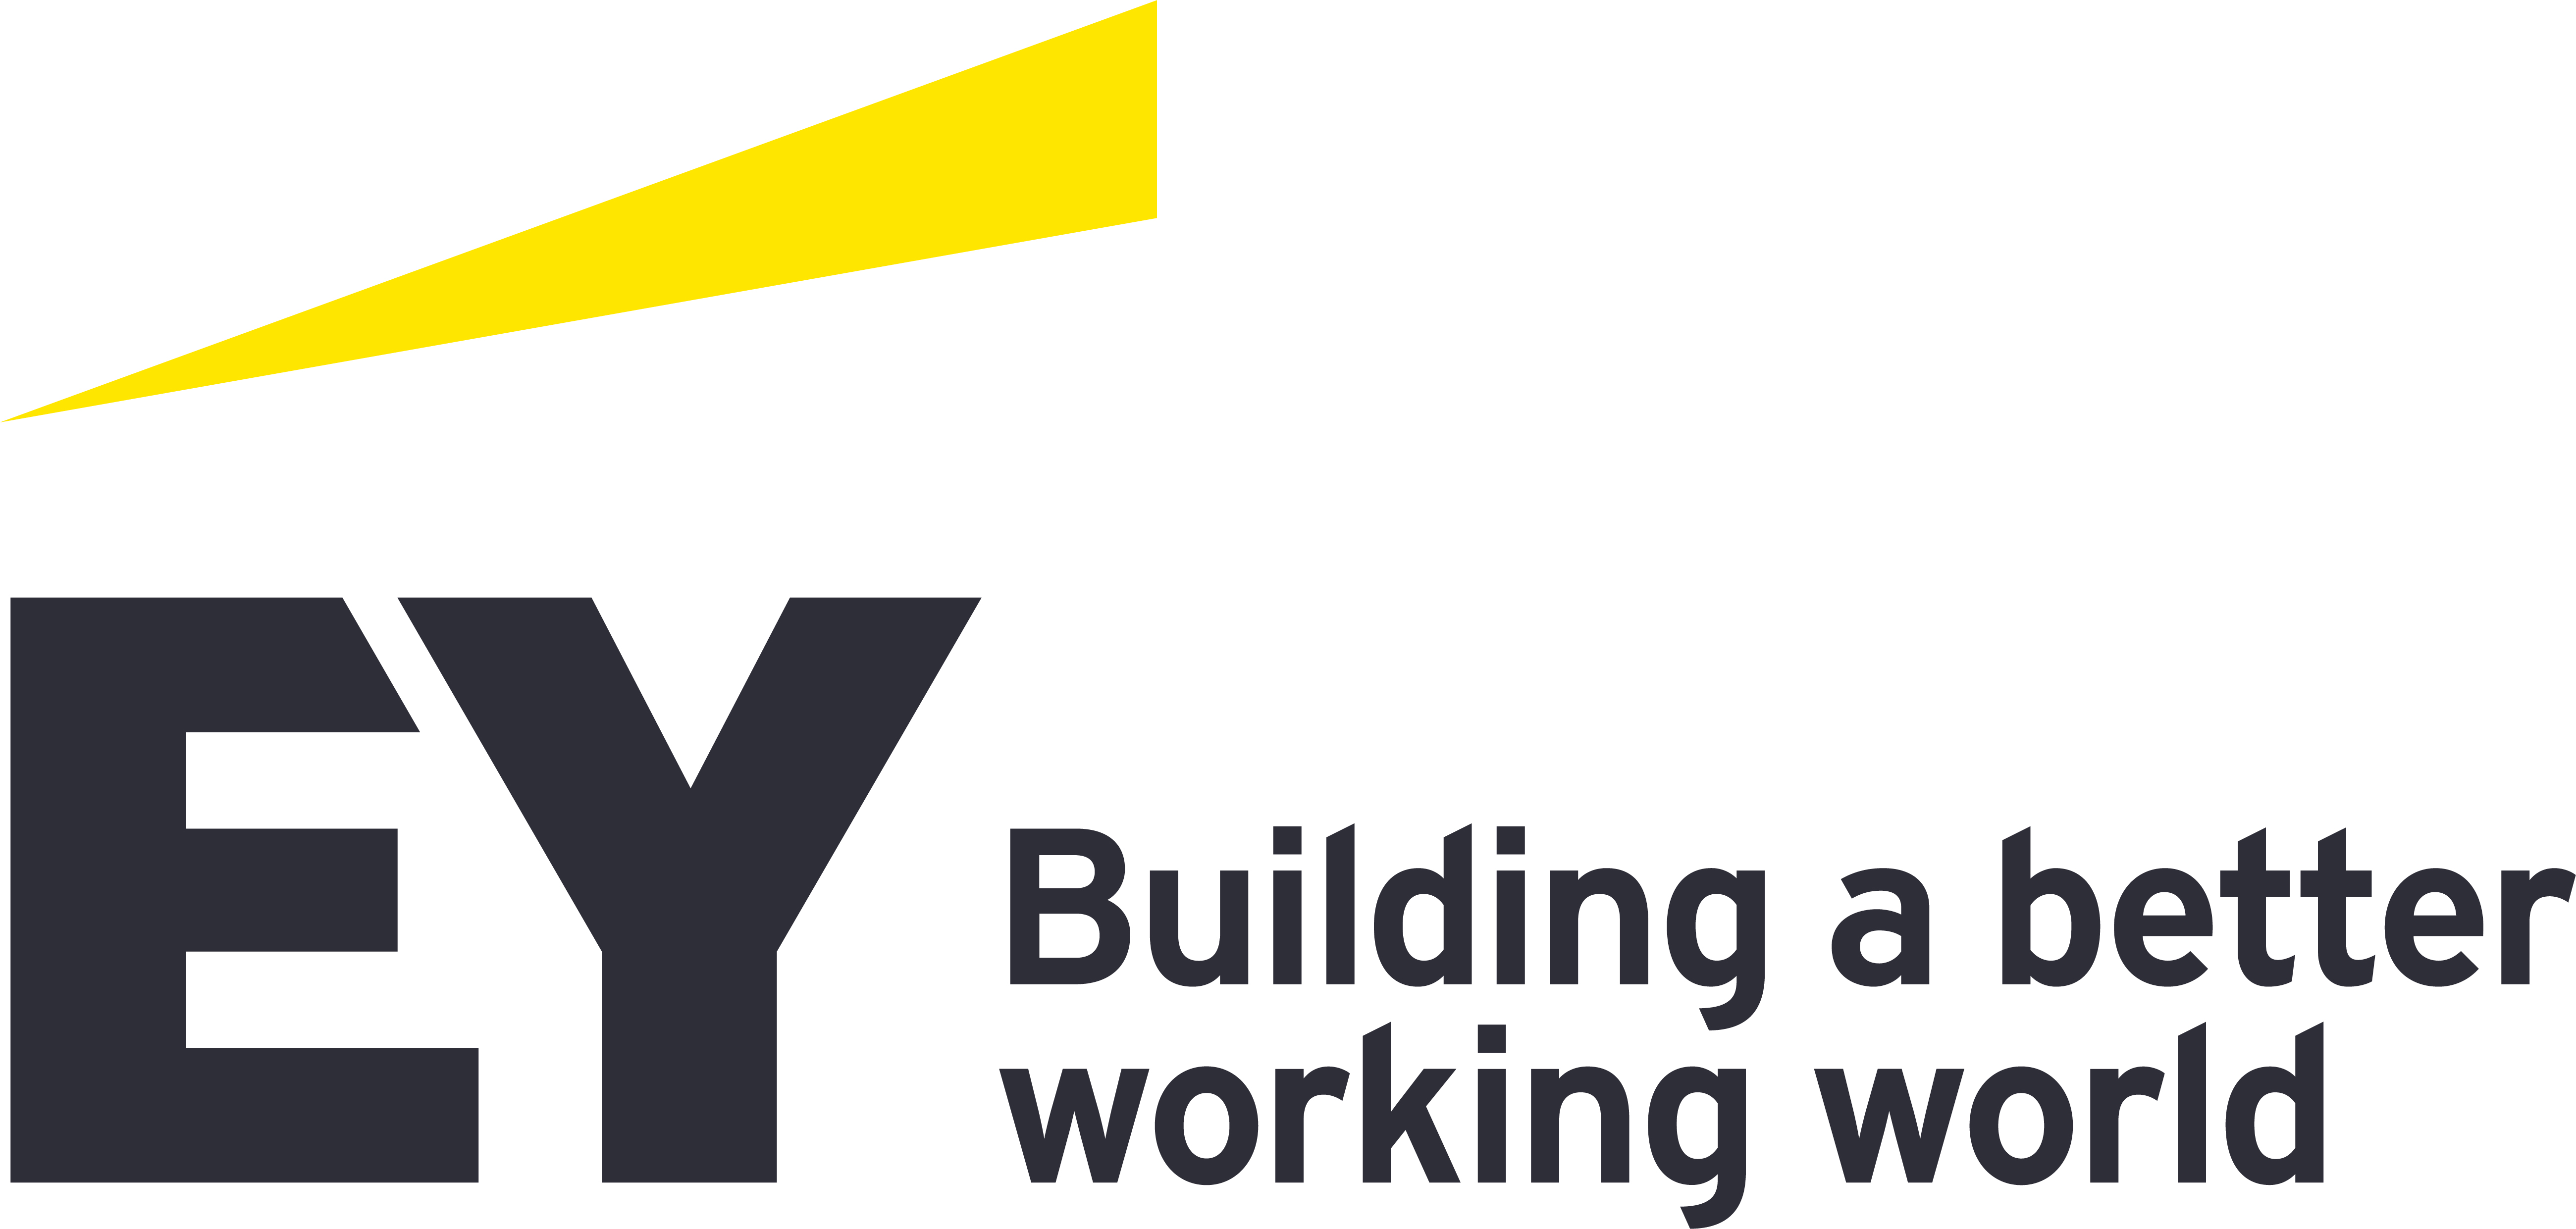 Ernst & Young Baltic AS